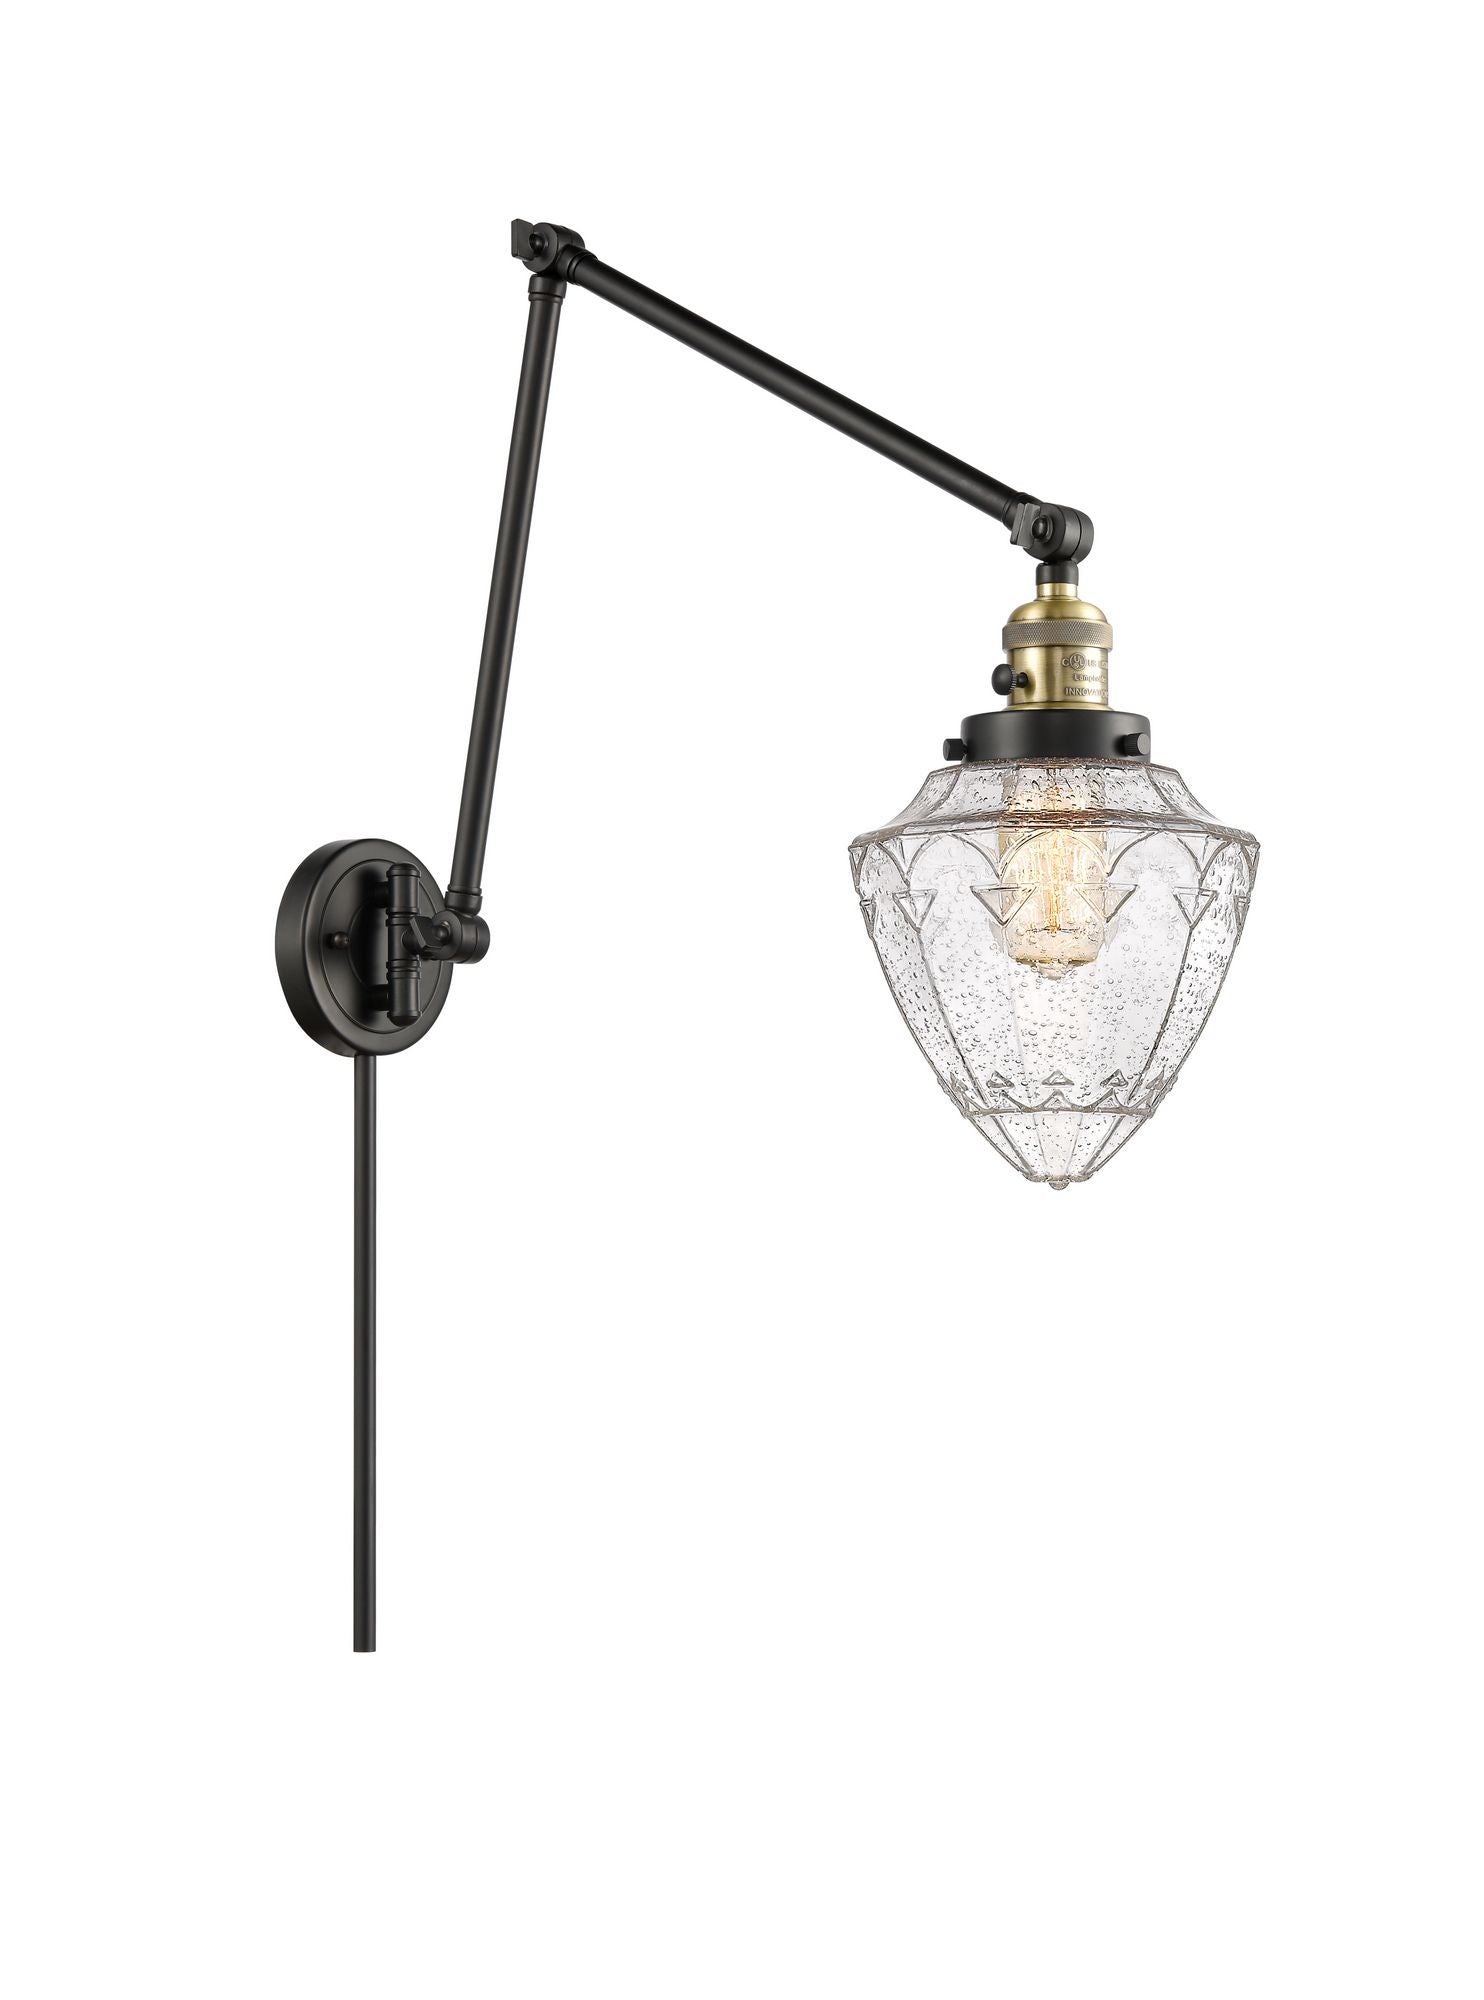 238-BAB-G664-7 1-Light 7" Black Antique Brass Swing Arm - Seedy Small Bullet Glass - LED Bulb - Dimmensions: 7 x 31.5 x 15.75 - Glass Up or Down: Yes